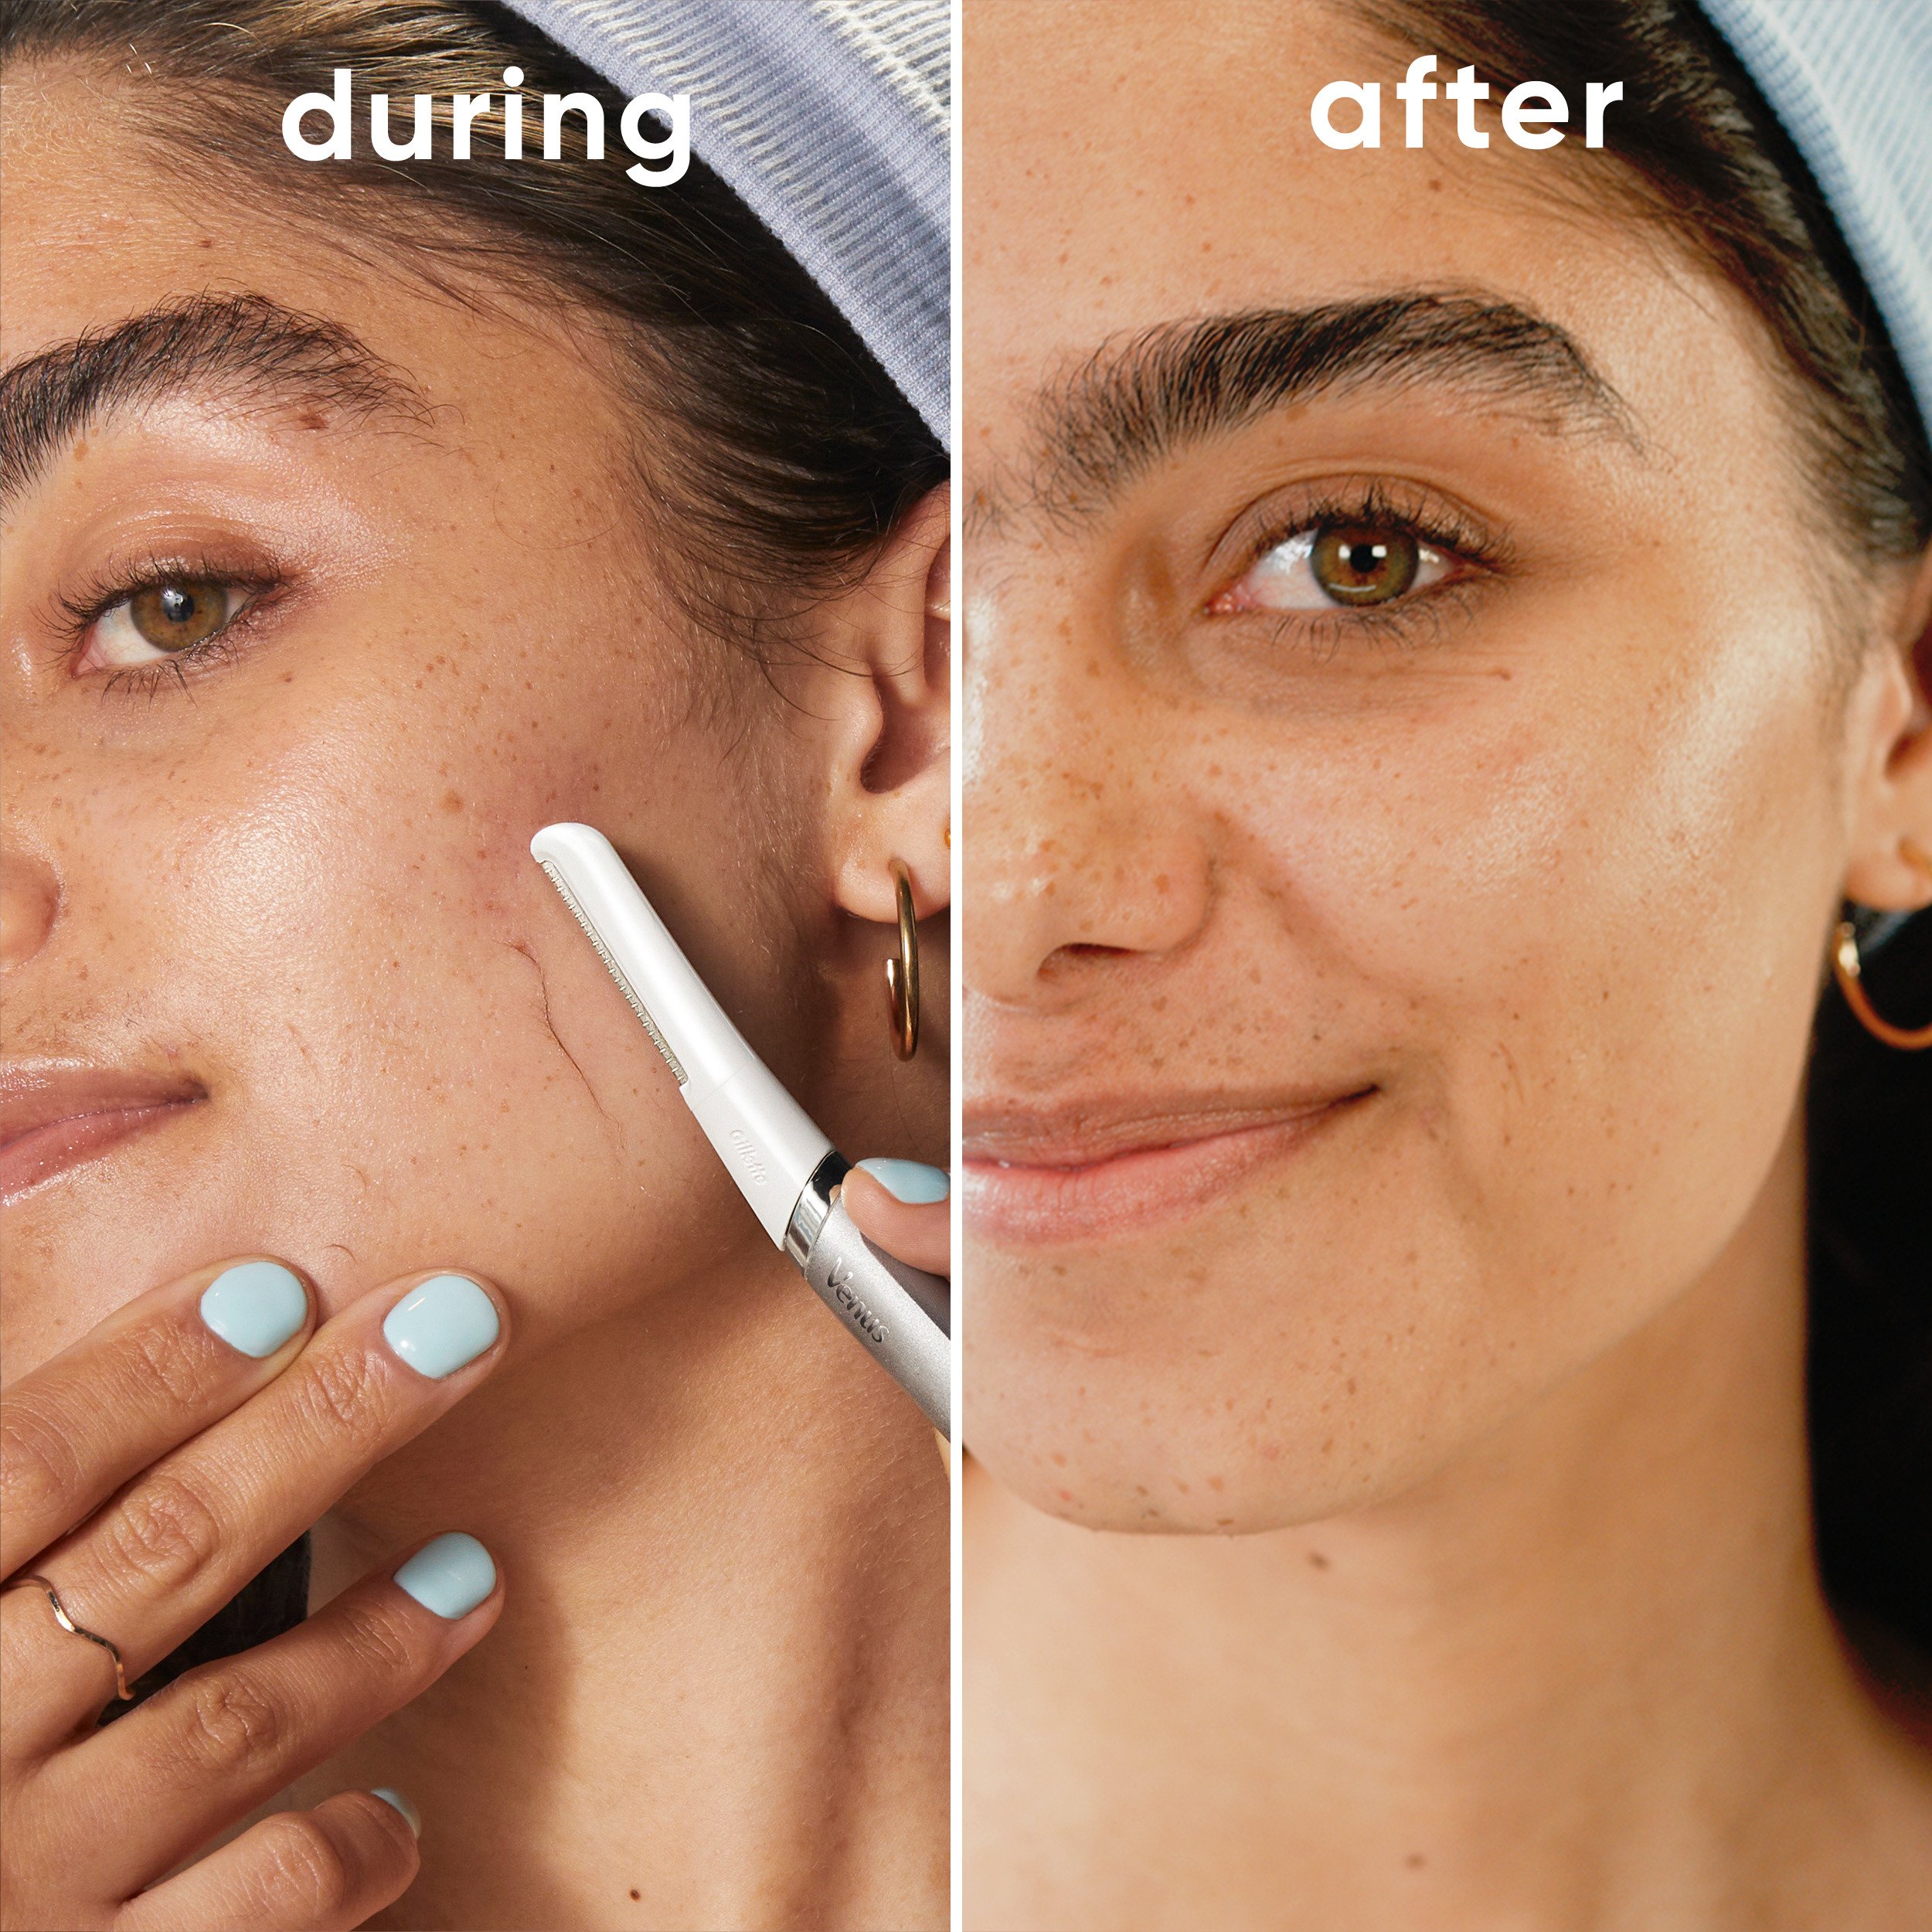 Before and after images of a woman using the Venus dermaplane tool | Venus UK